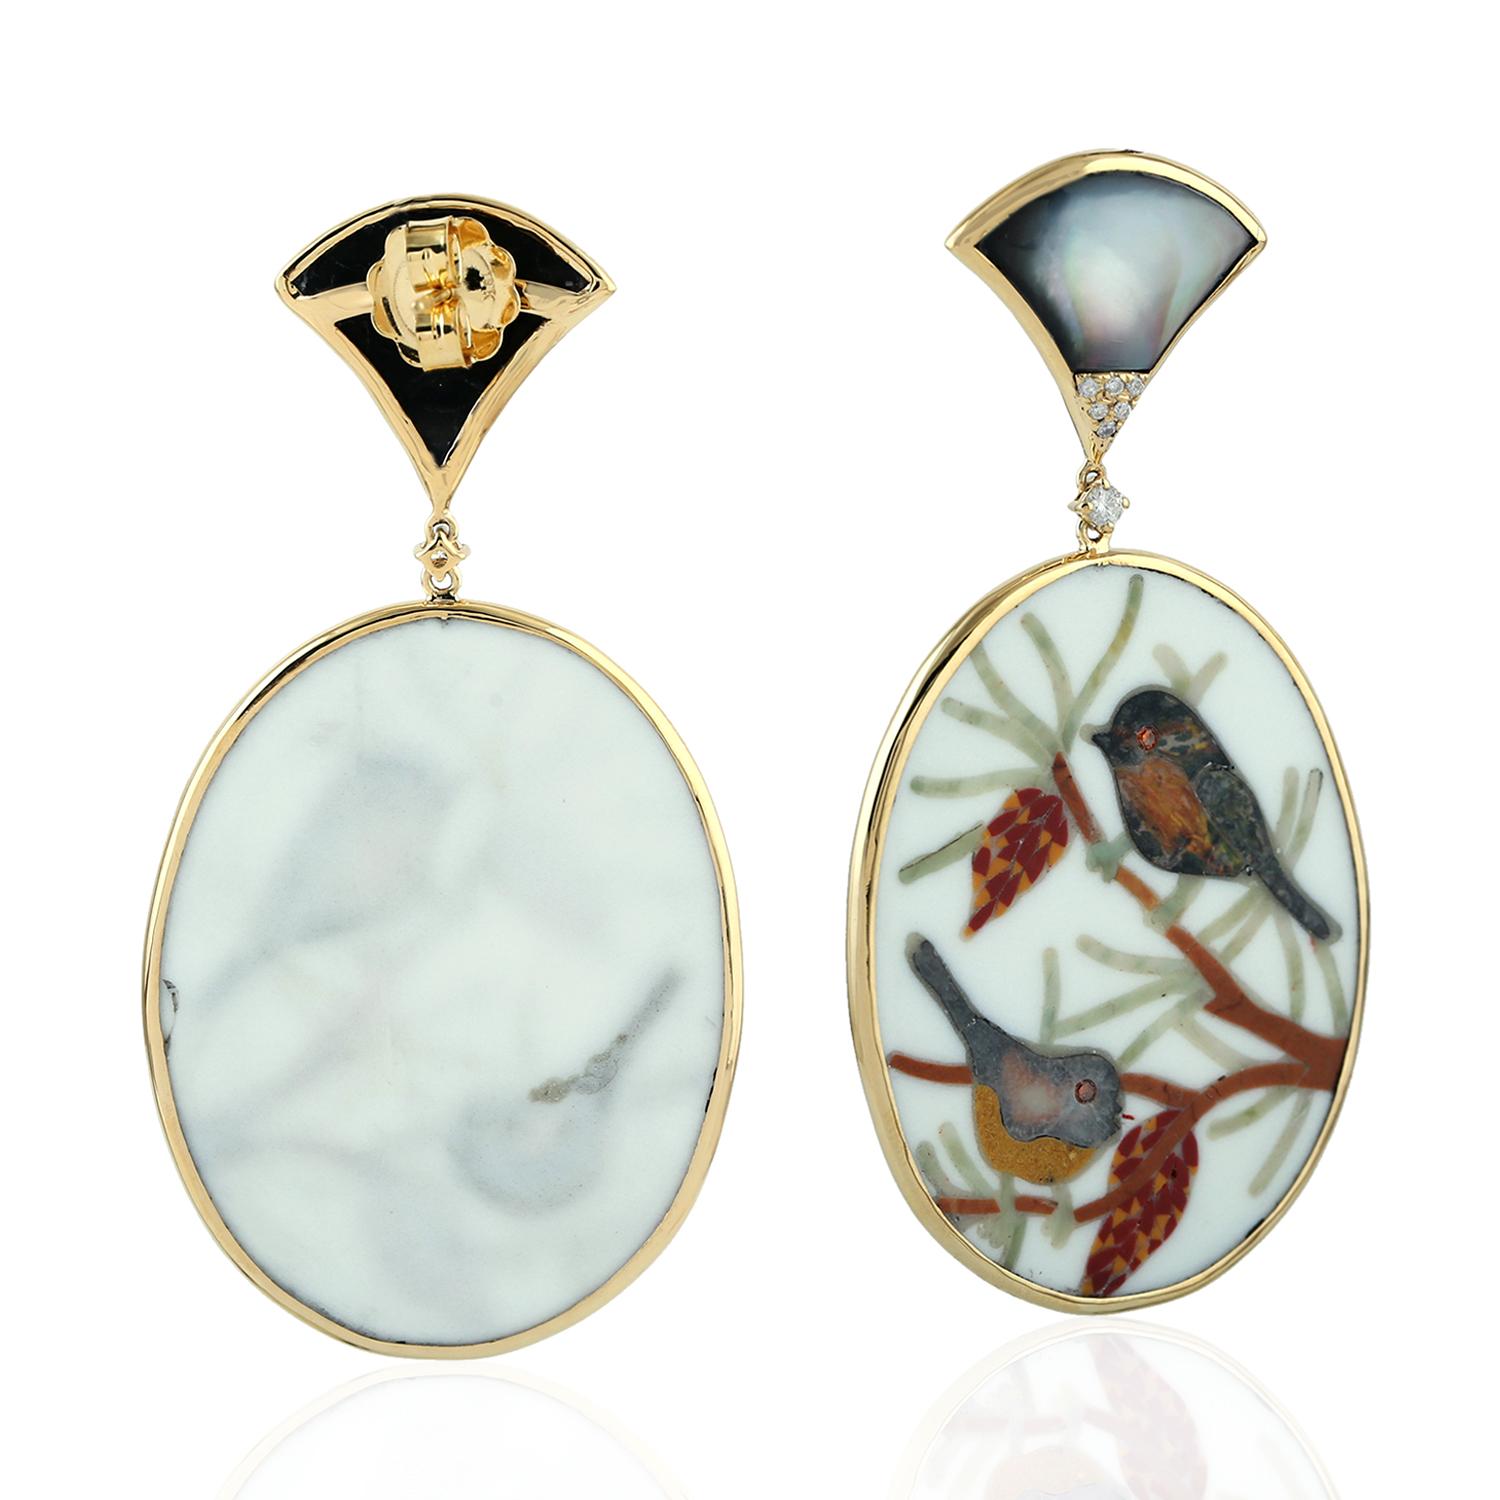 These beautiful earrings features unique hand painted miniature art set. Cast in 18-karat gold.  It is set with 8.85 carats Mother of pearl and .29 carats of sparkling diamonds. 

FOLLOW  MEGHNA JEWELS storefront to view the latest collection &